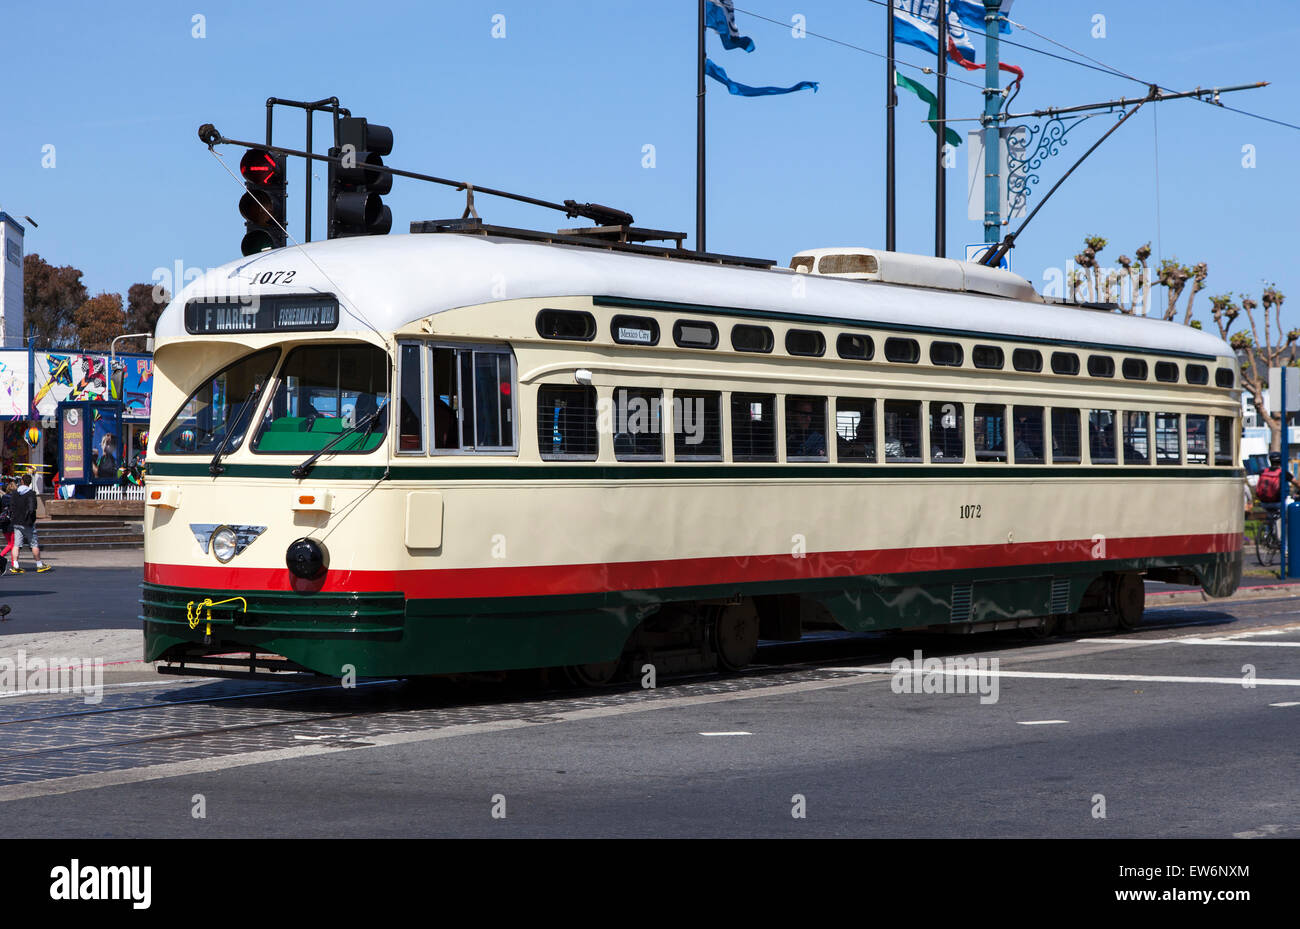 A Vintage Tram in Downtown San Francisco, USA Stock Photo